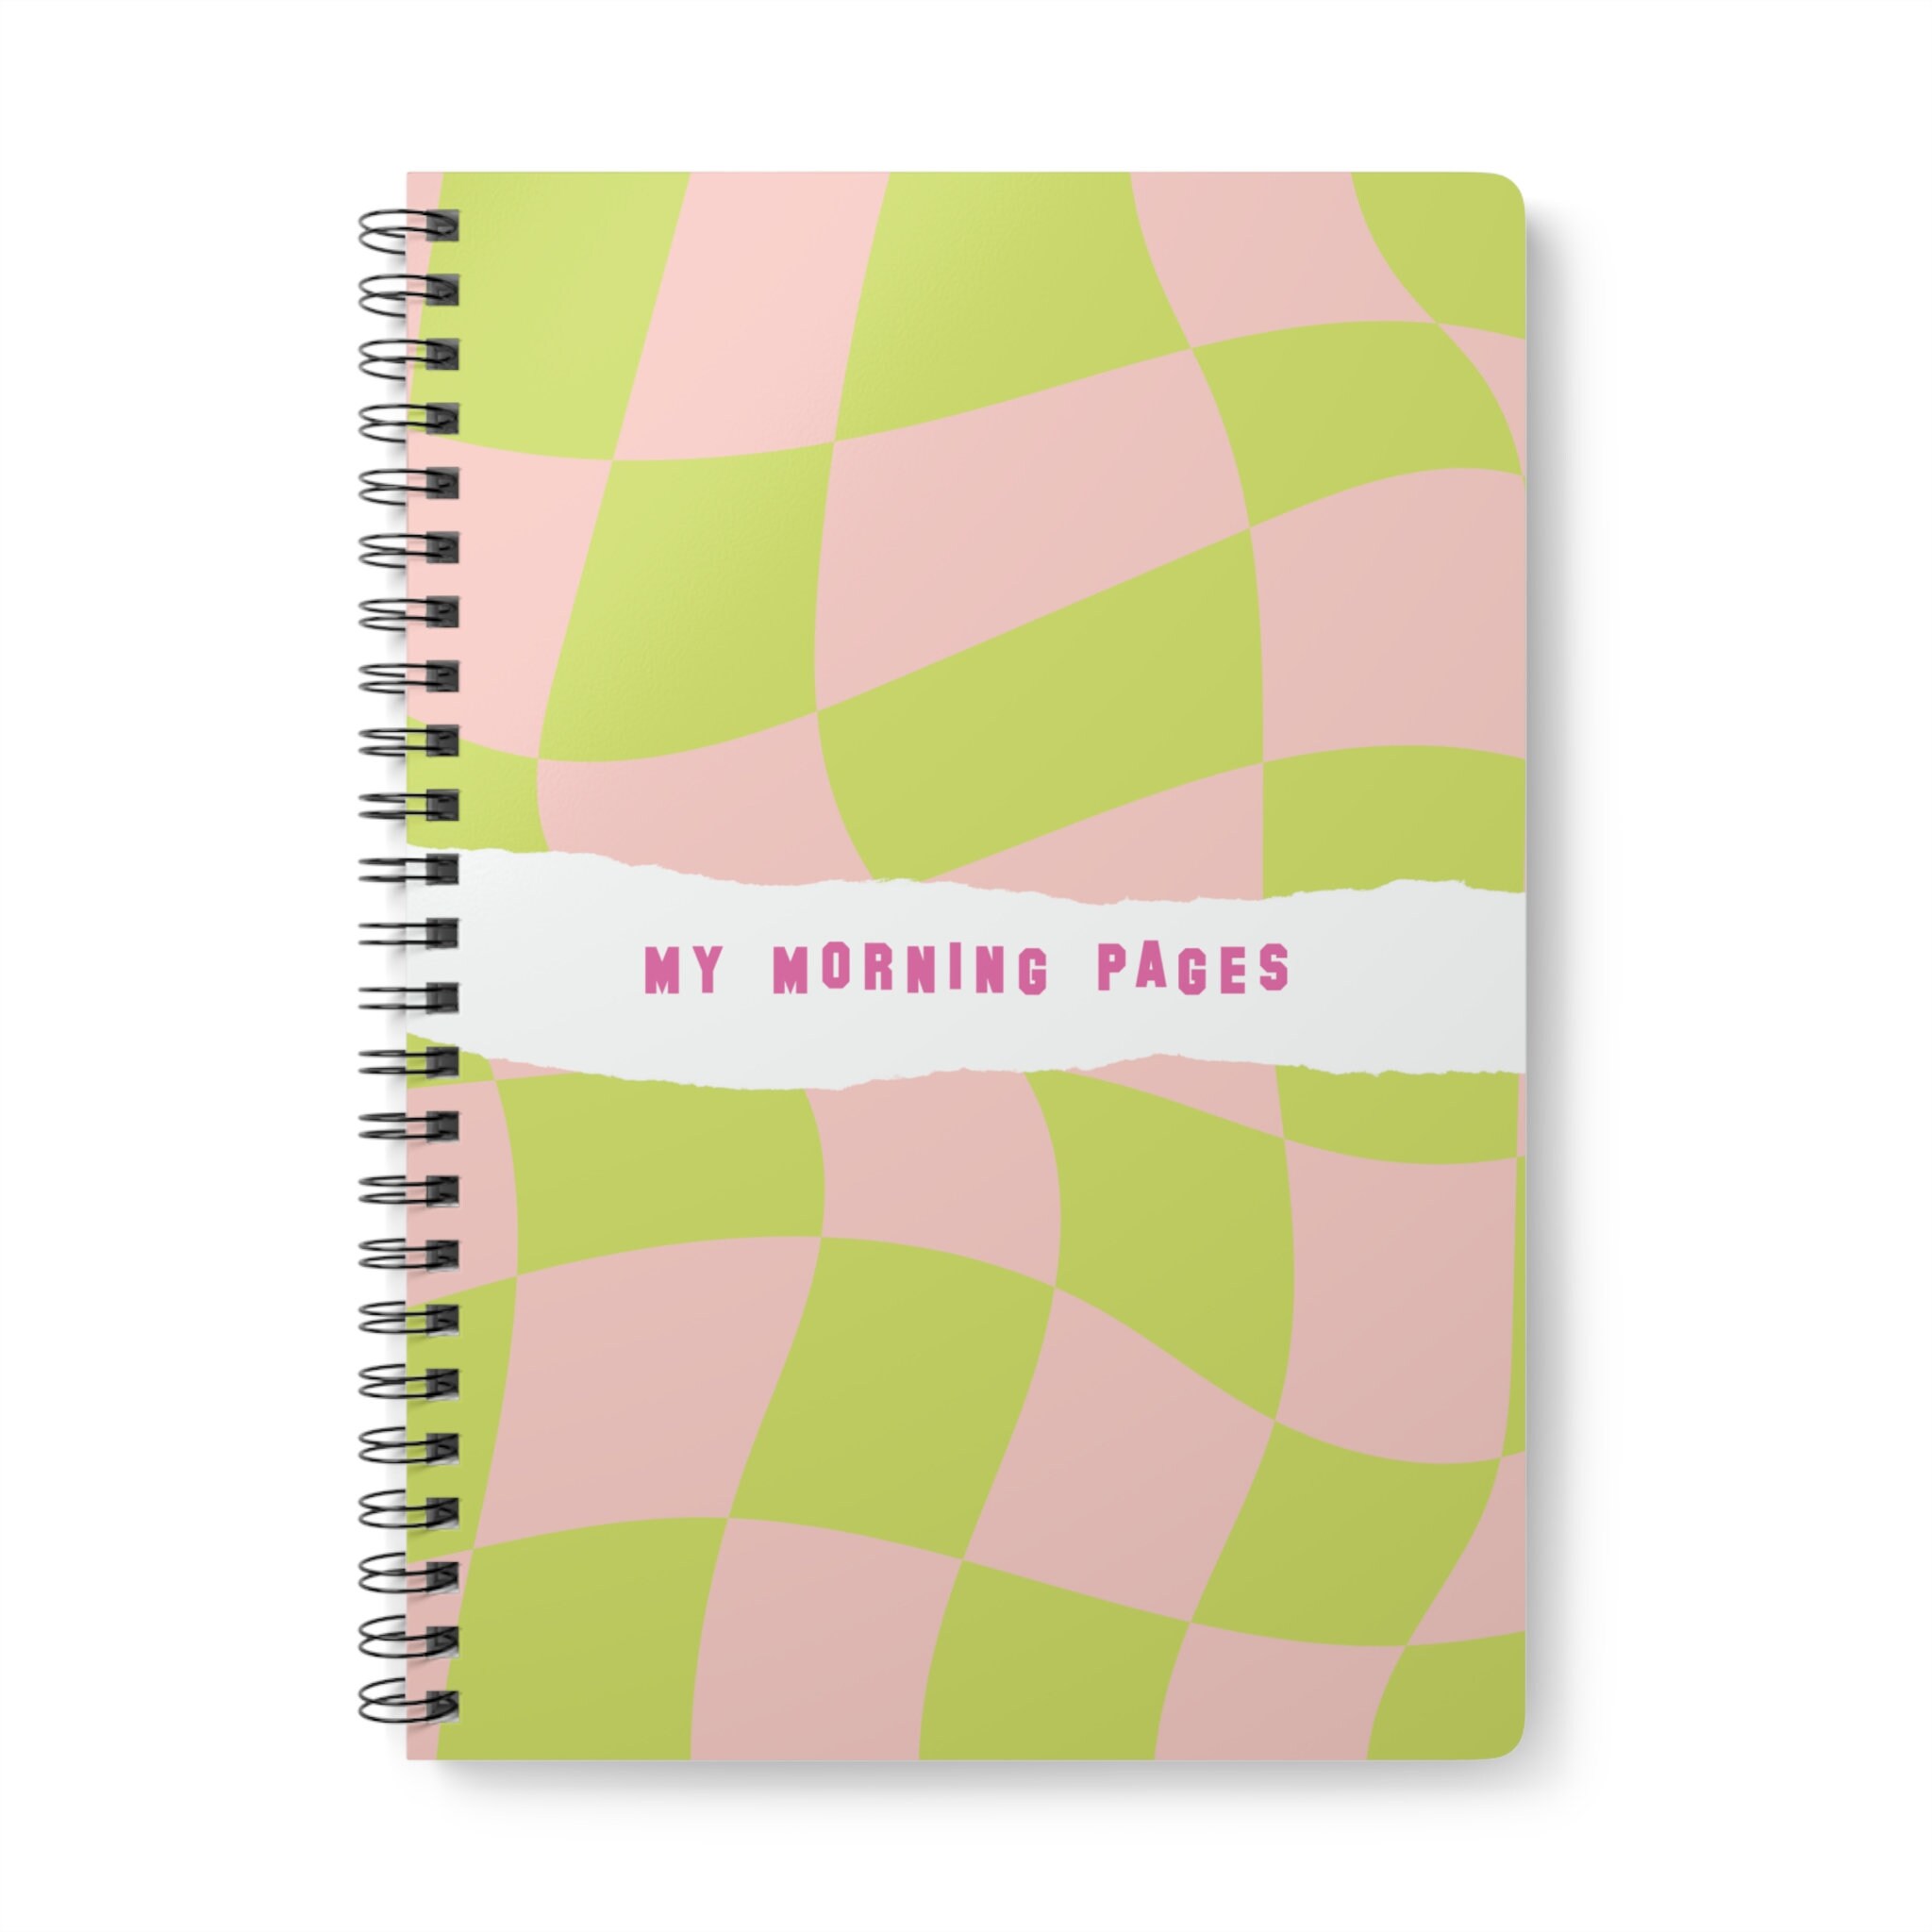 Arteza Watercolor Paper Pad, Spiral-Bound Hardcover, Pink, Cold